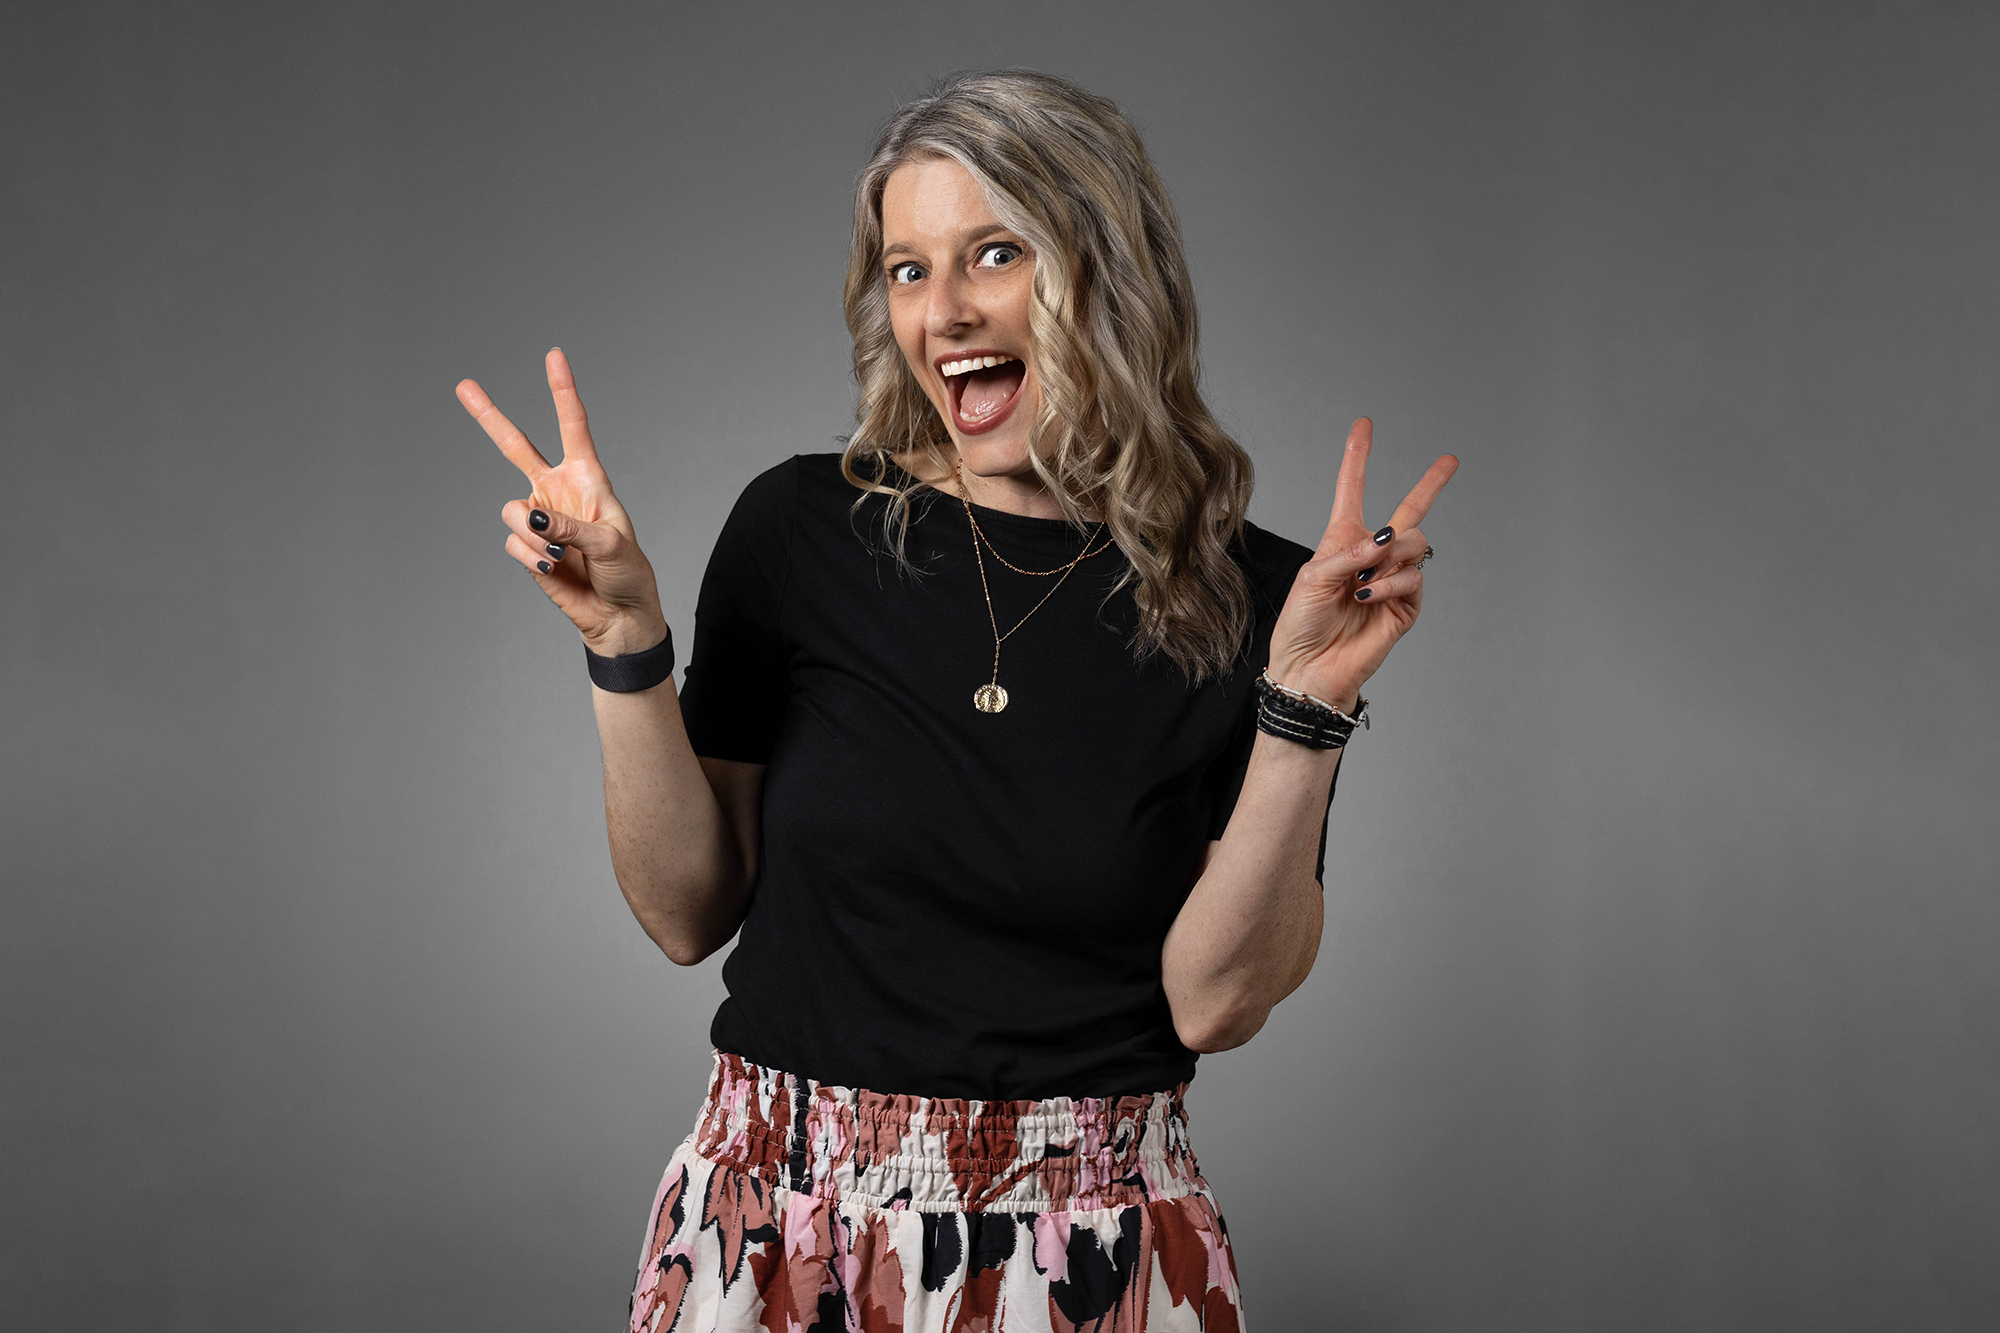 A woman wearing a black shirt and floral skirt making a peace sign poses for corporate headshots.